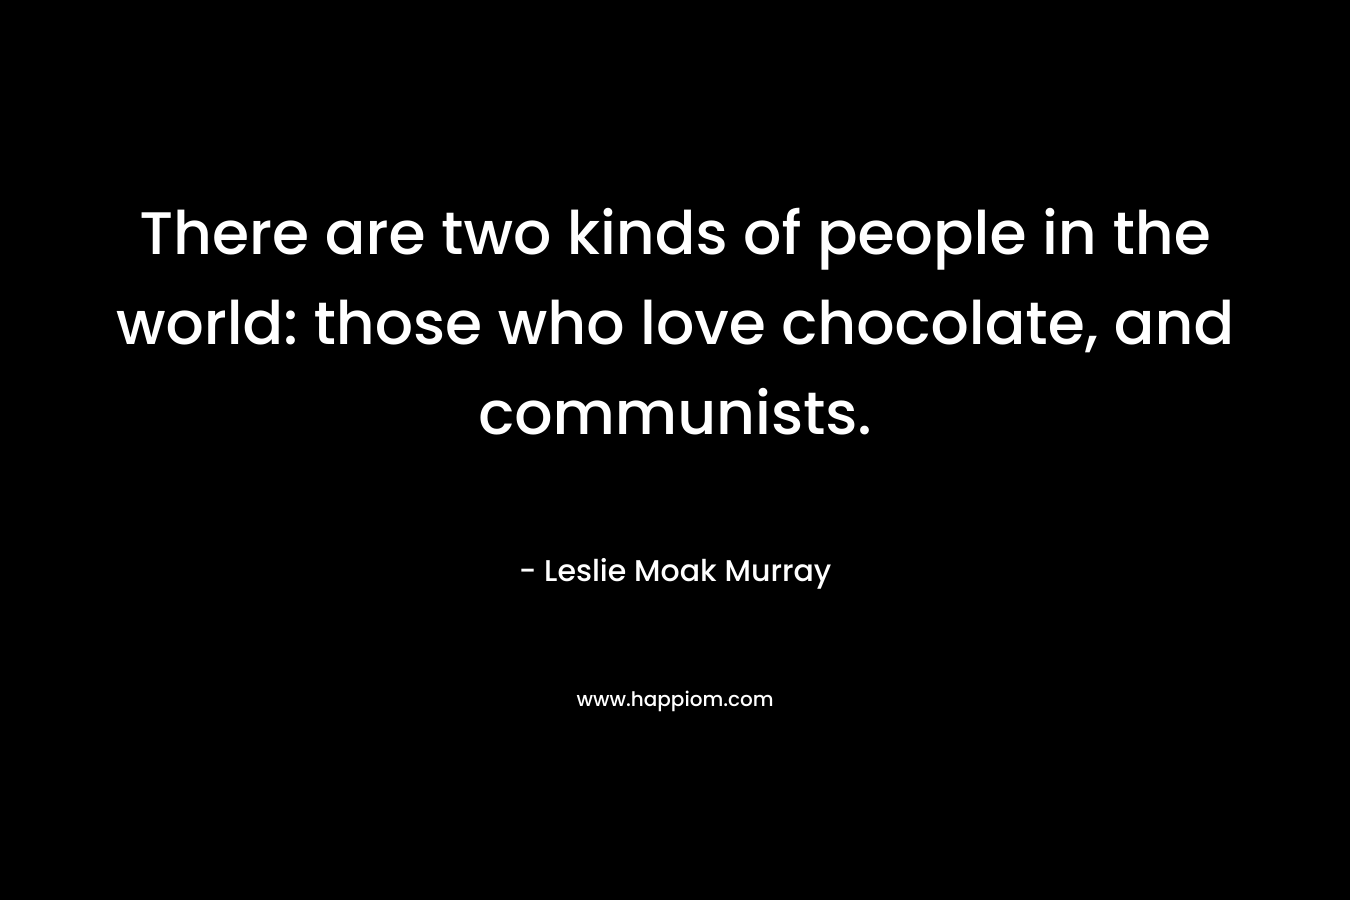 There are two kinds of people in the world: those who love chocolate, and communists.